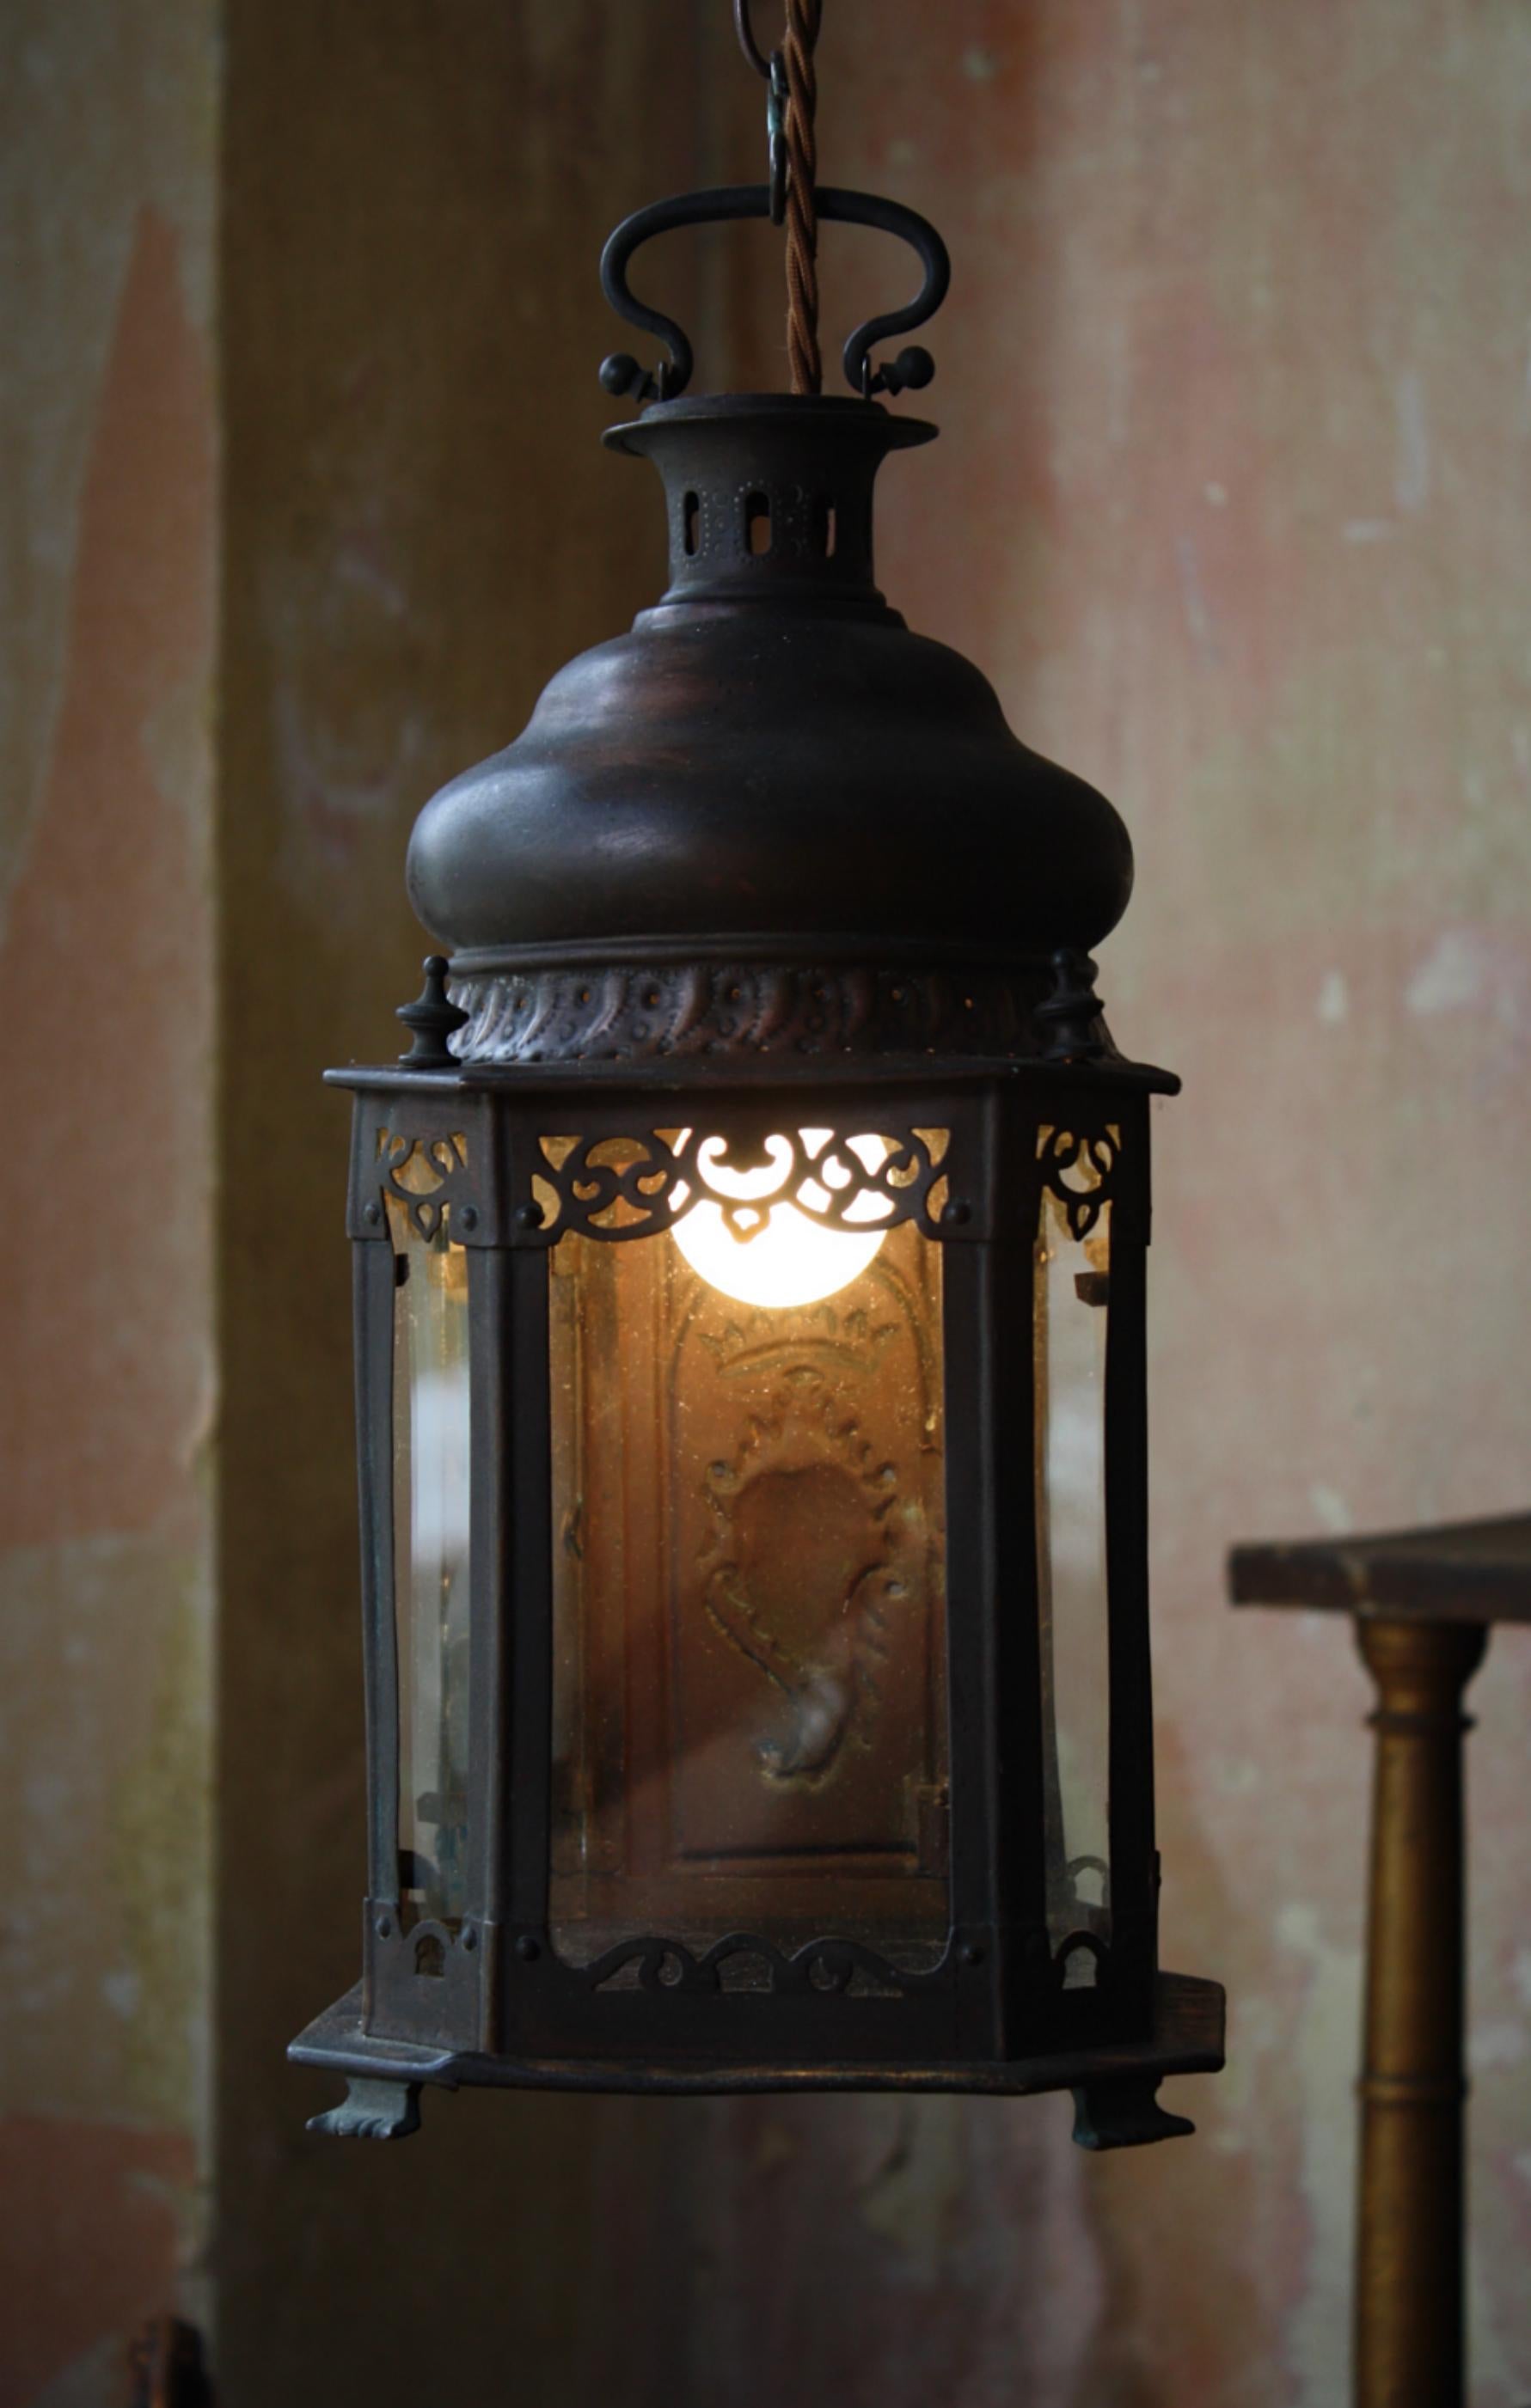 A diminutive copper devotional lantern, used within the catholic household. 

Constructed from pierced and pressed copper, a hinged door with a pressed sacred heart adorns one side with the remaining three being clear glass and a stained deep blue